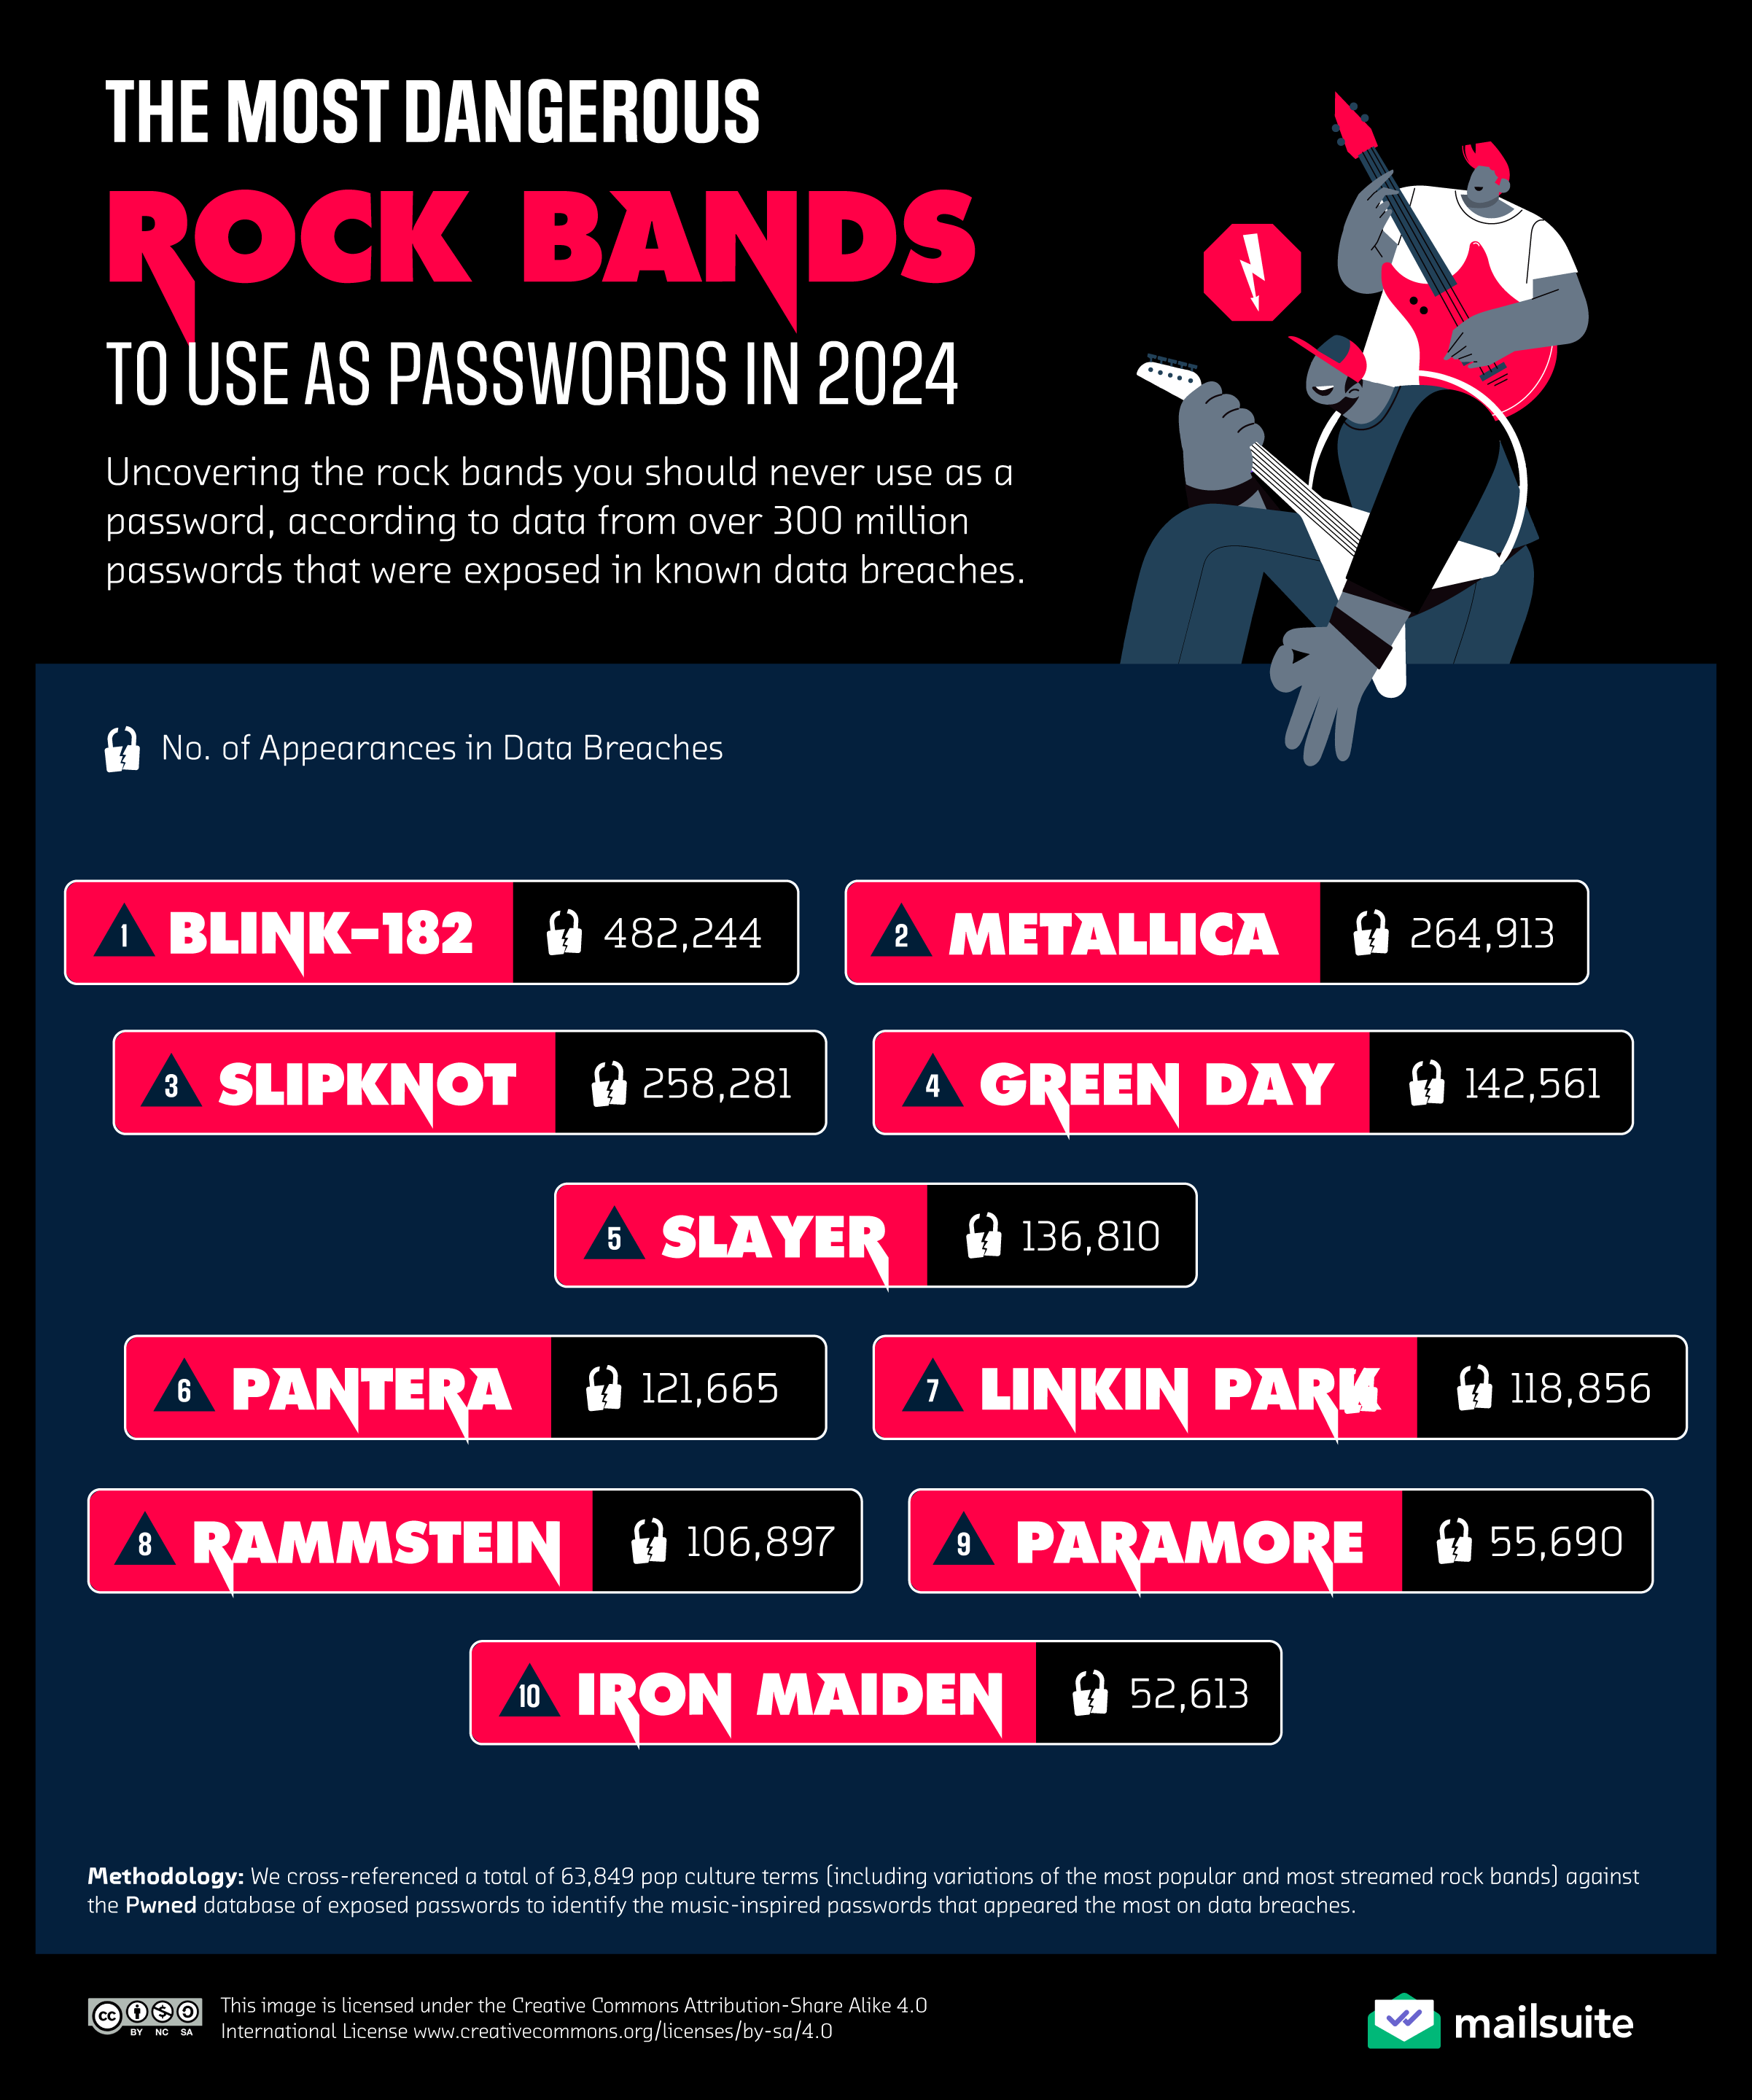 The Most Dangerous Rock Bands to Use As Passwords in 2024